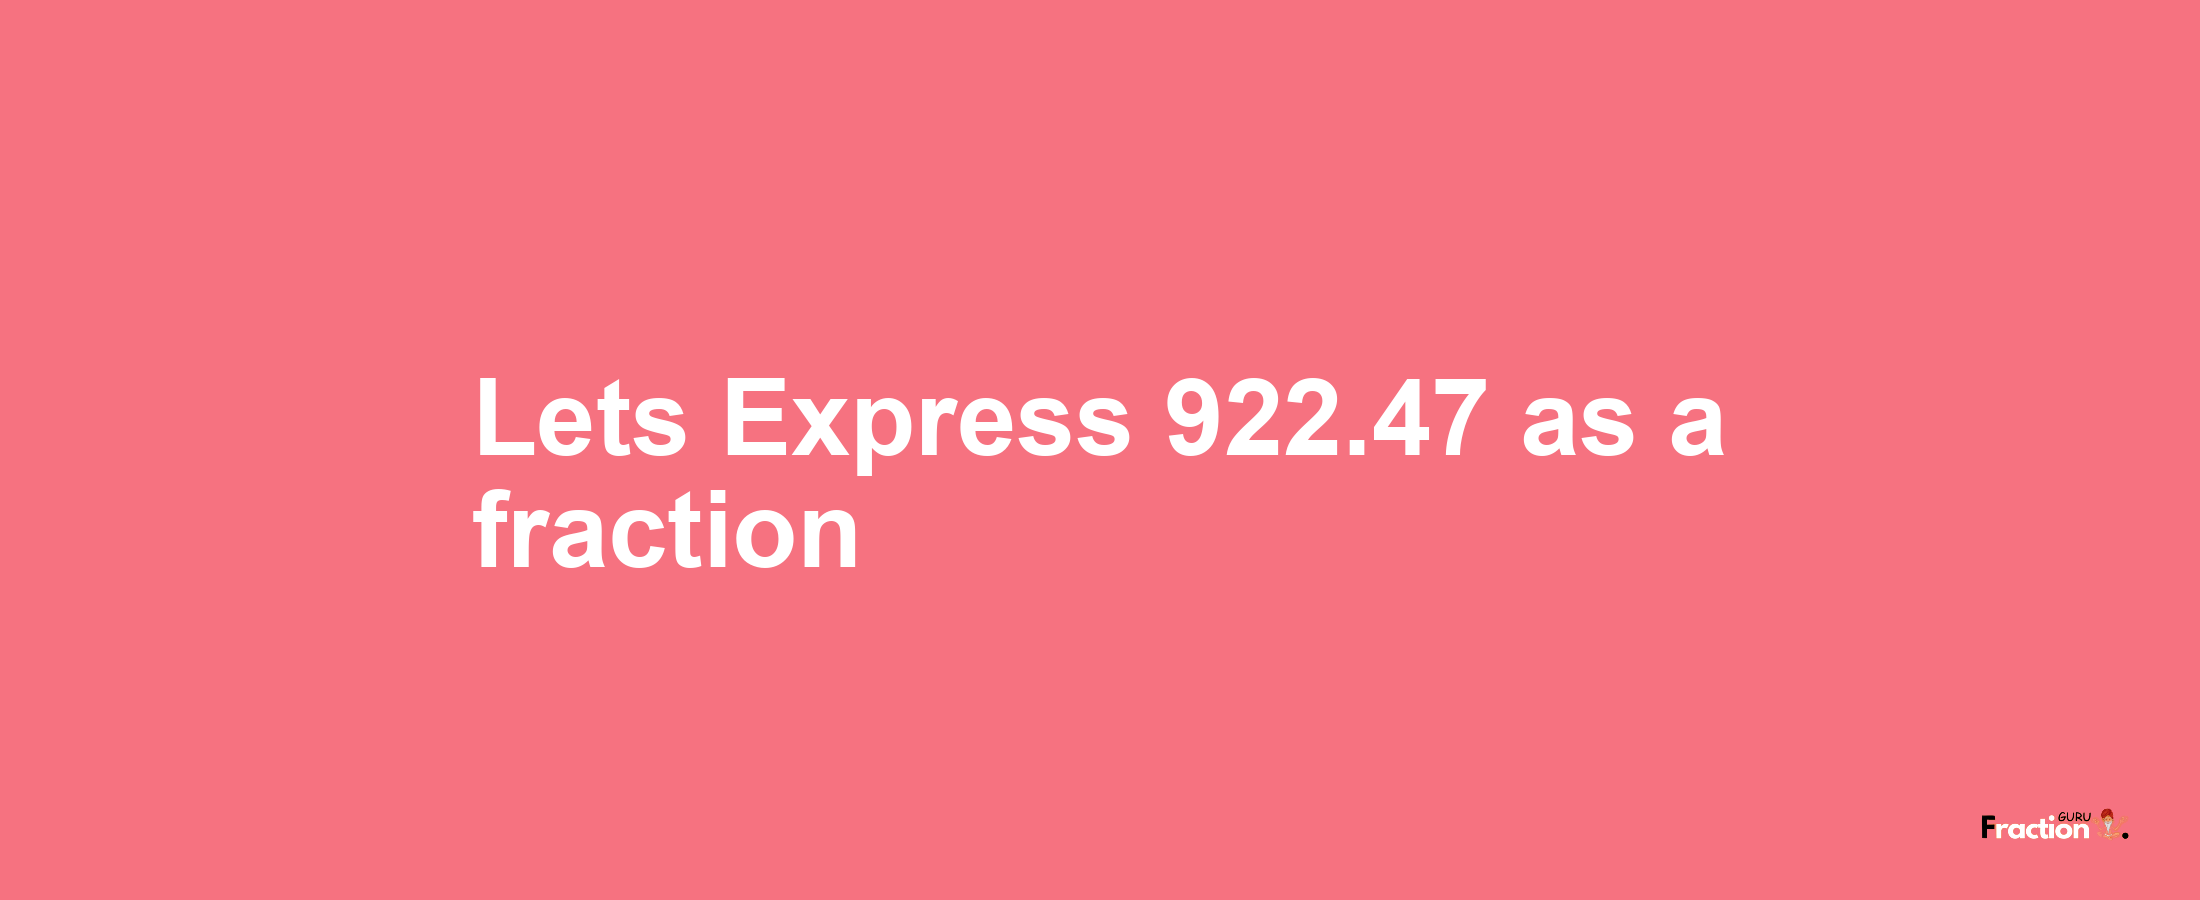 Lets Express 922.47 as afraction